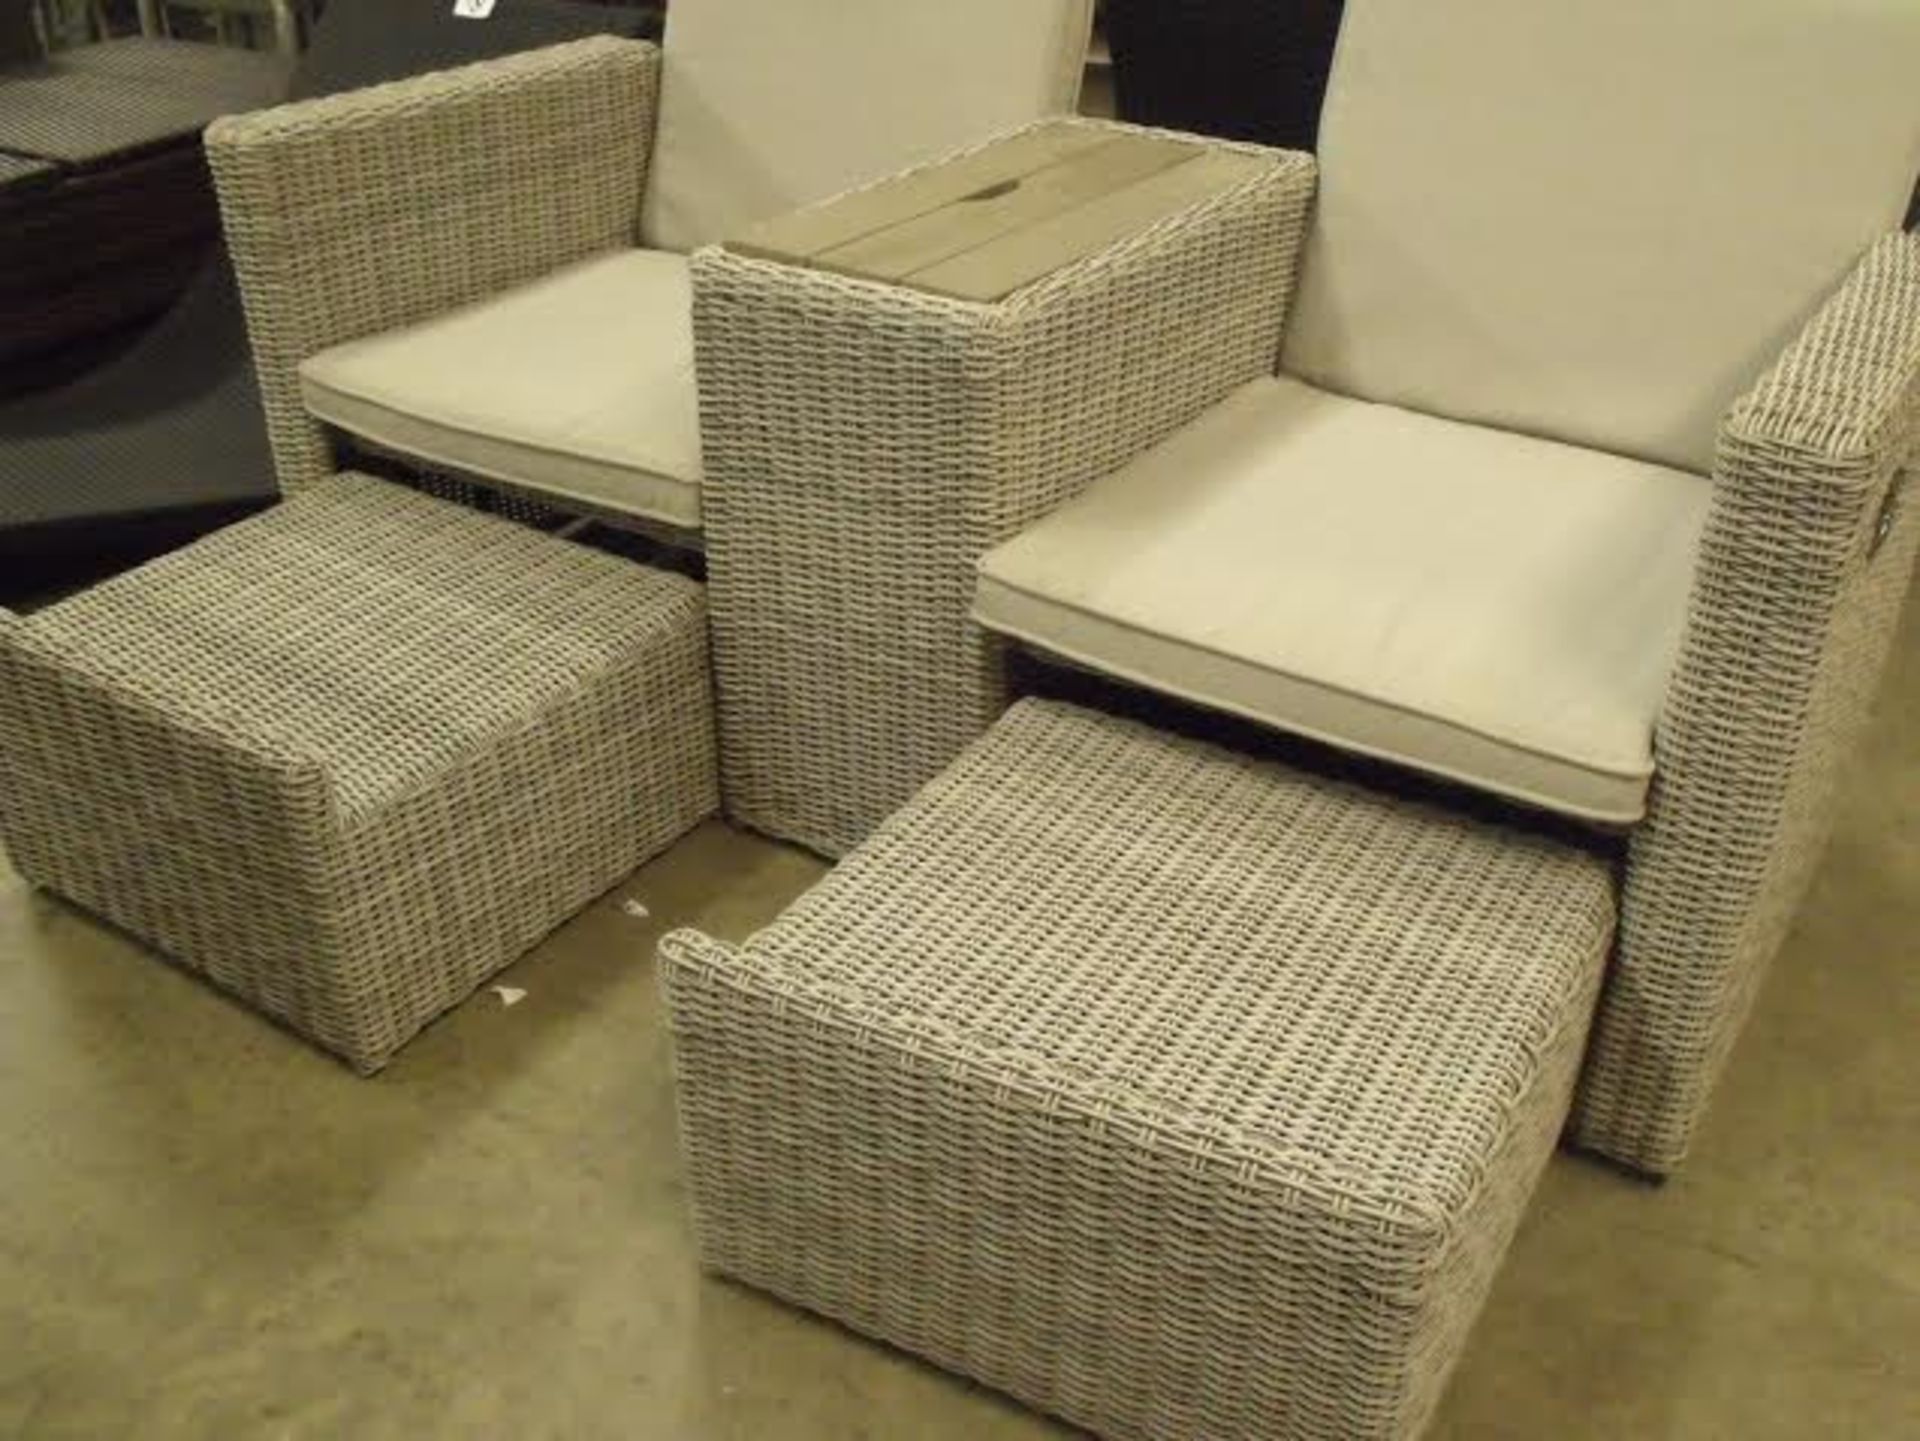 EXECUTIVE HIS n HERS RECLINING LOUNGE SET FULL ROUND MULTI GREY RATTAN 2 X STOW AWAY FOOTSTOOLS - Image 2 of 6